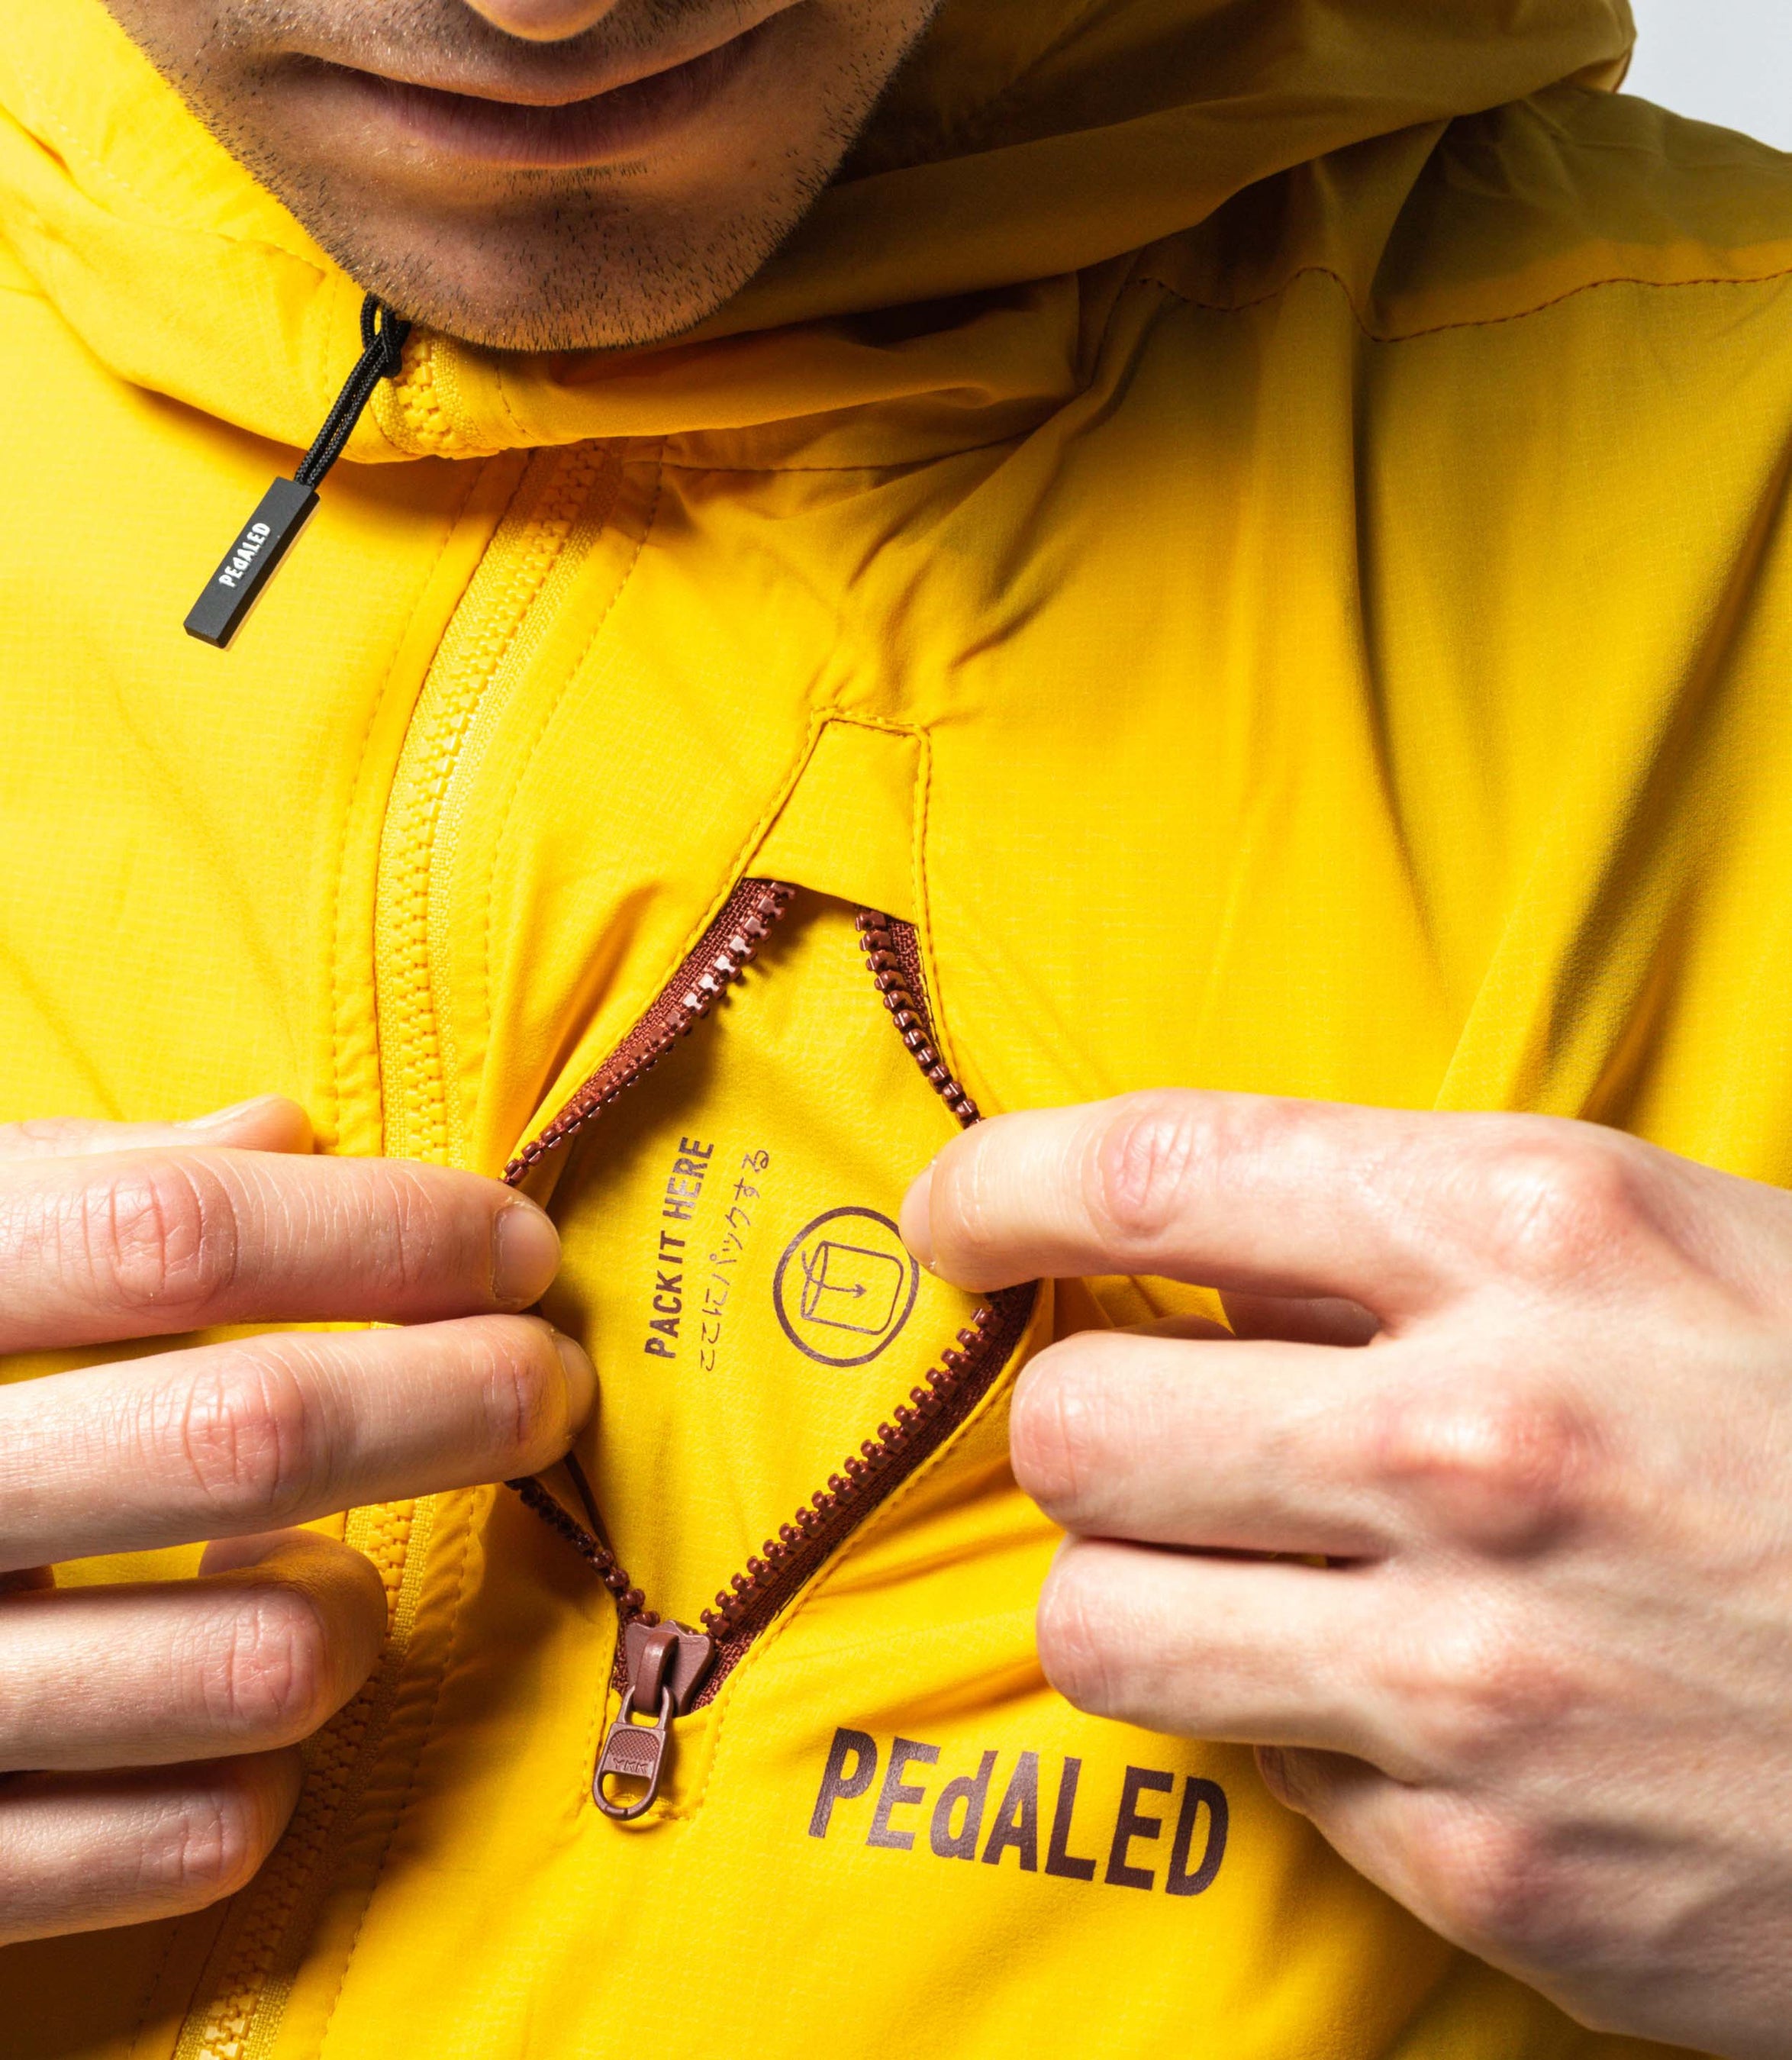 23SJKJA0JPE_7_cycling jacket packable yellow jary front pocket pedaled